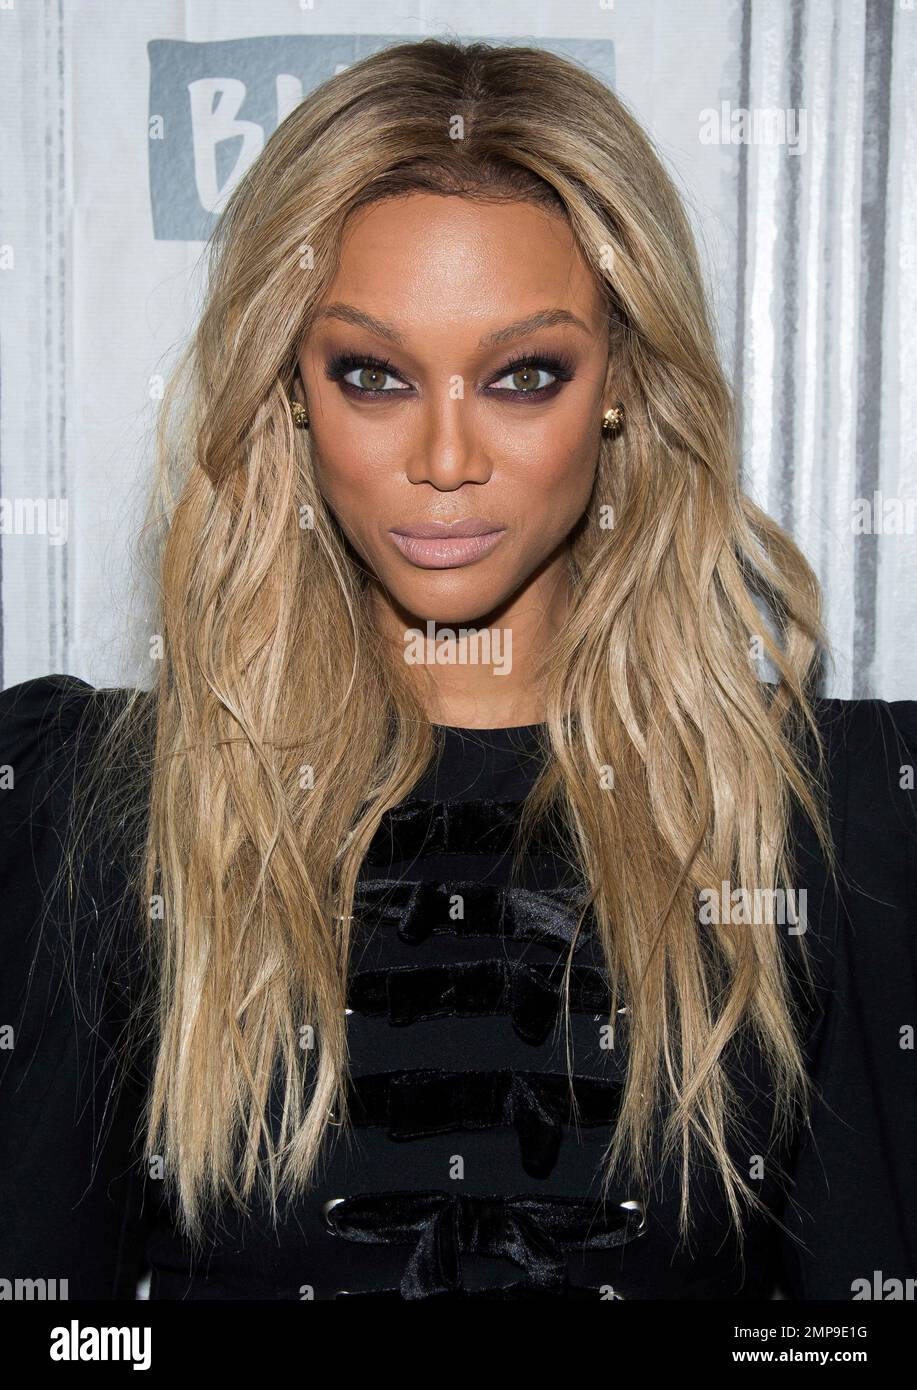 Tyra Banks participates in the BUILD Speaker Series to discuss the new  season of "America's Next Top Model" at AOL Studios on Tuesday, Jan. 9, 2018,  in New York. (Photo by Charles